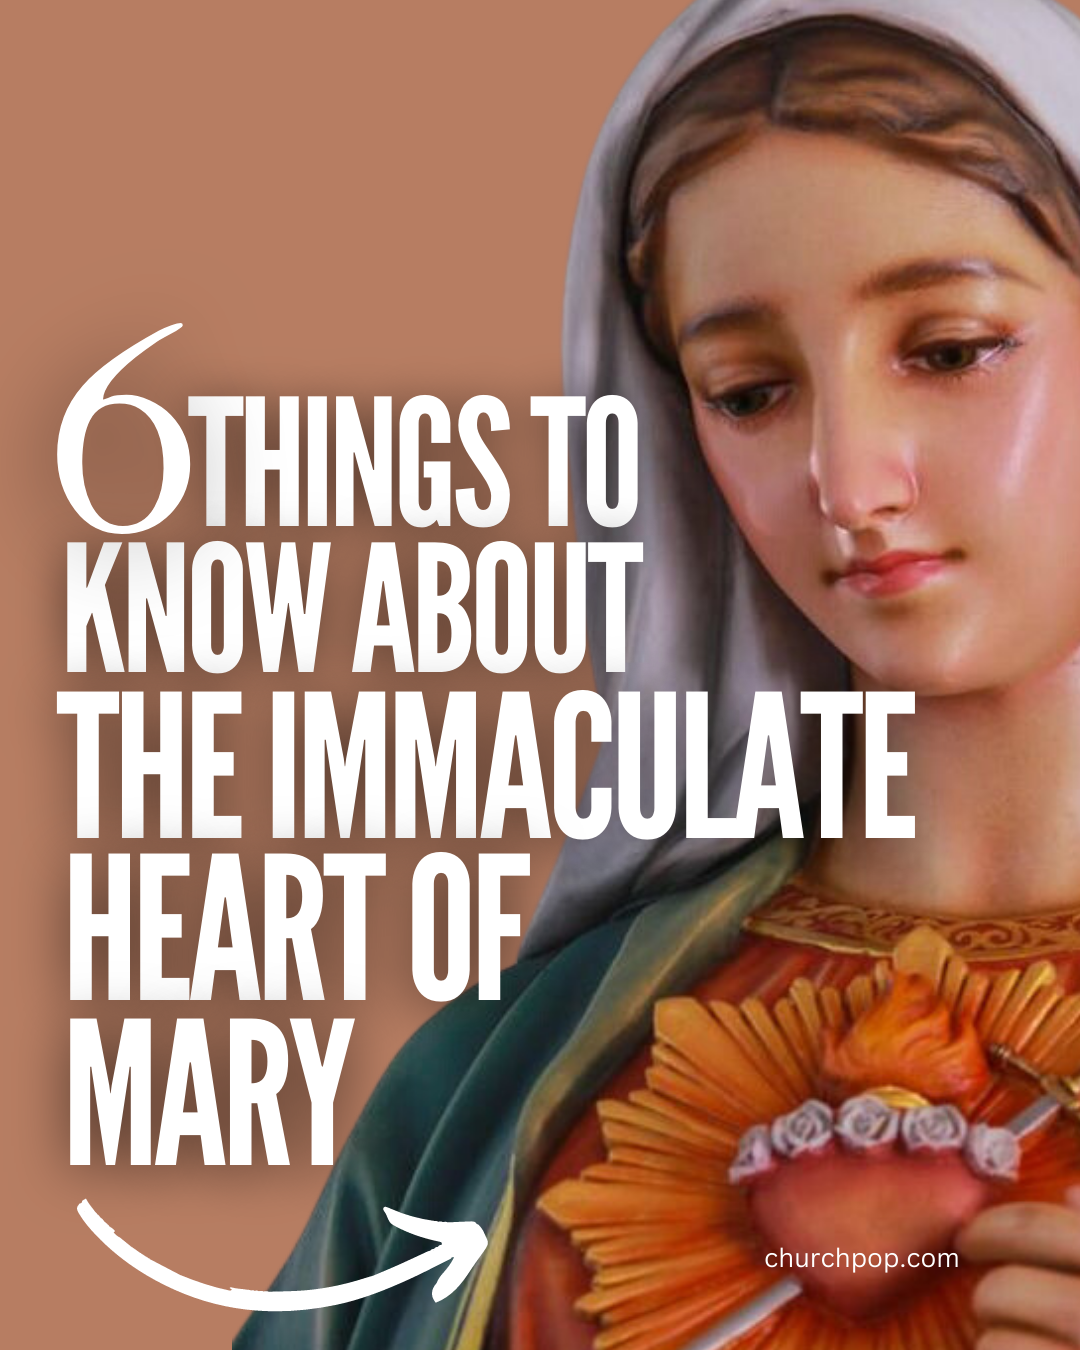 What is Immaculate Heart of Mary?